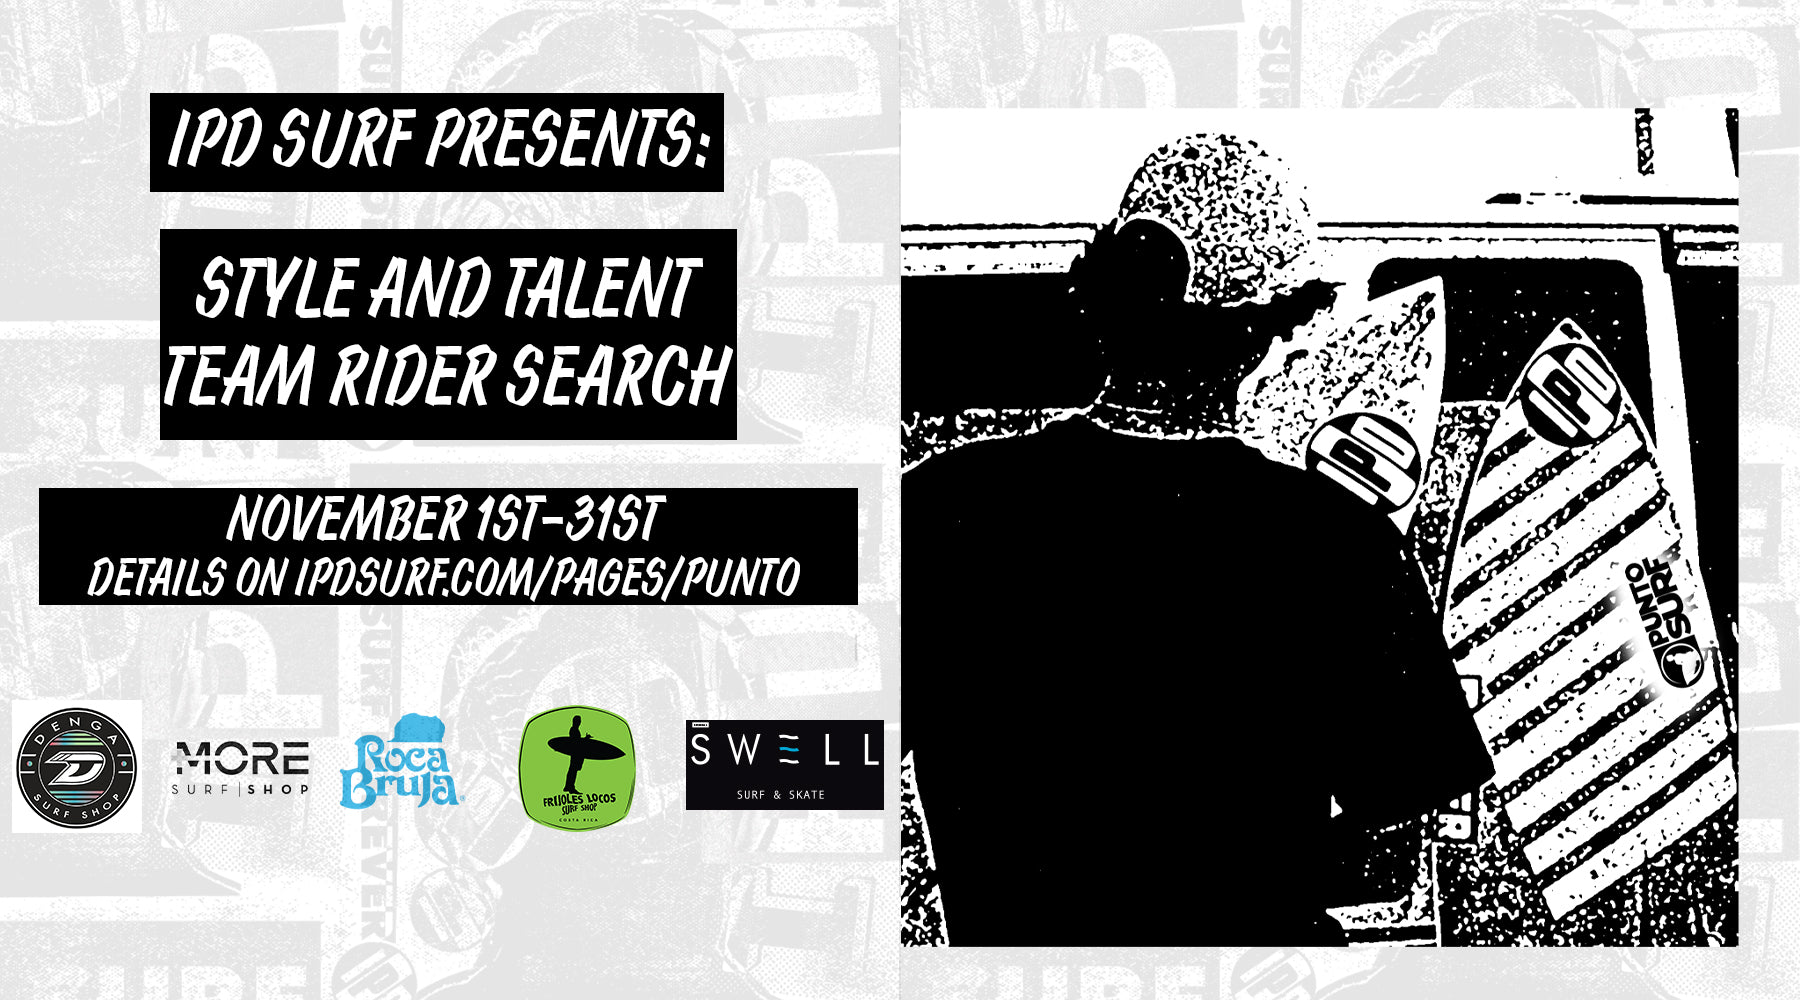 IPD X PUNTO SURF PRESENT: STYLE AND TALENT TEAM RIDER SEARCH